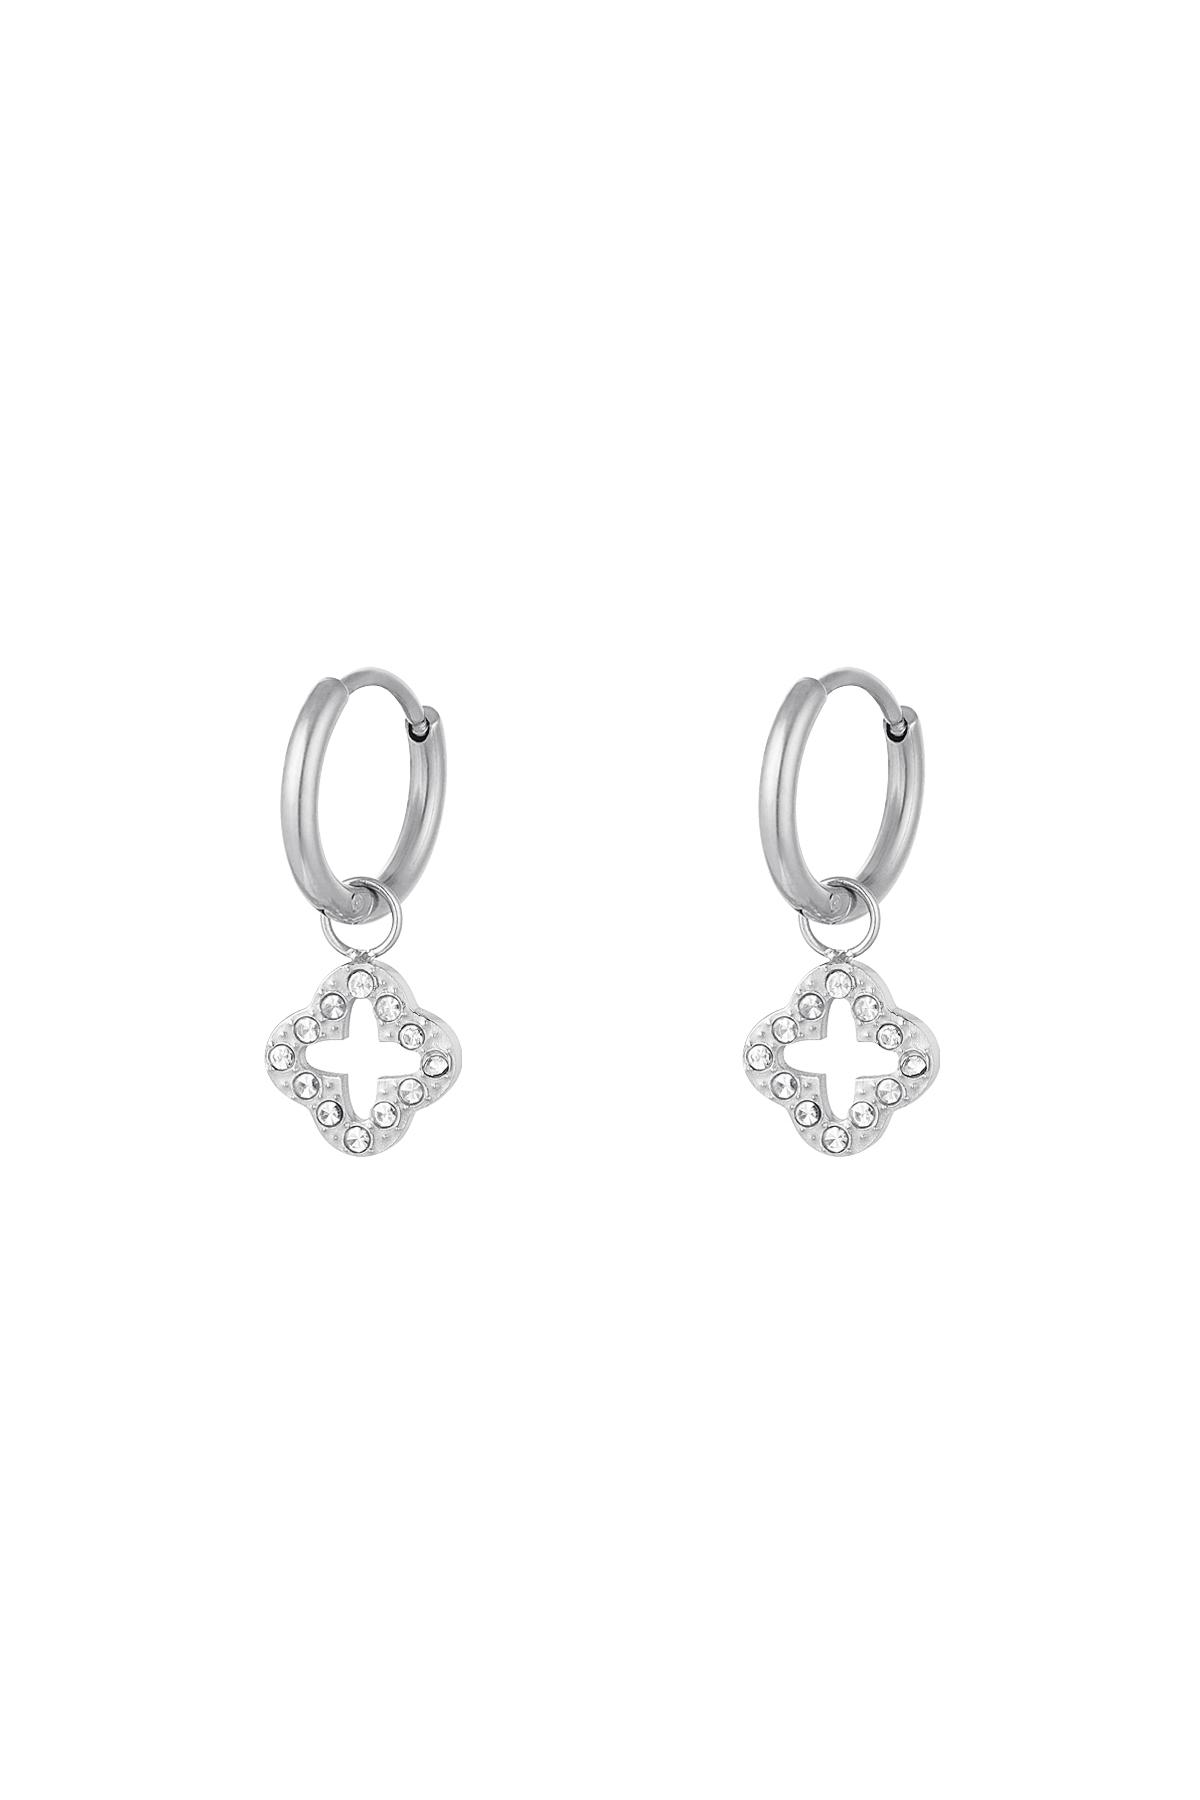 Earrings clover with zircon stones Silver Stainless Steel